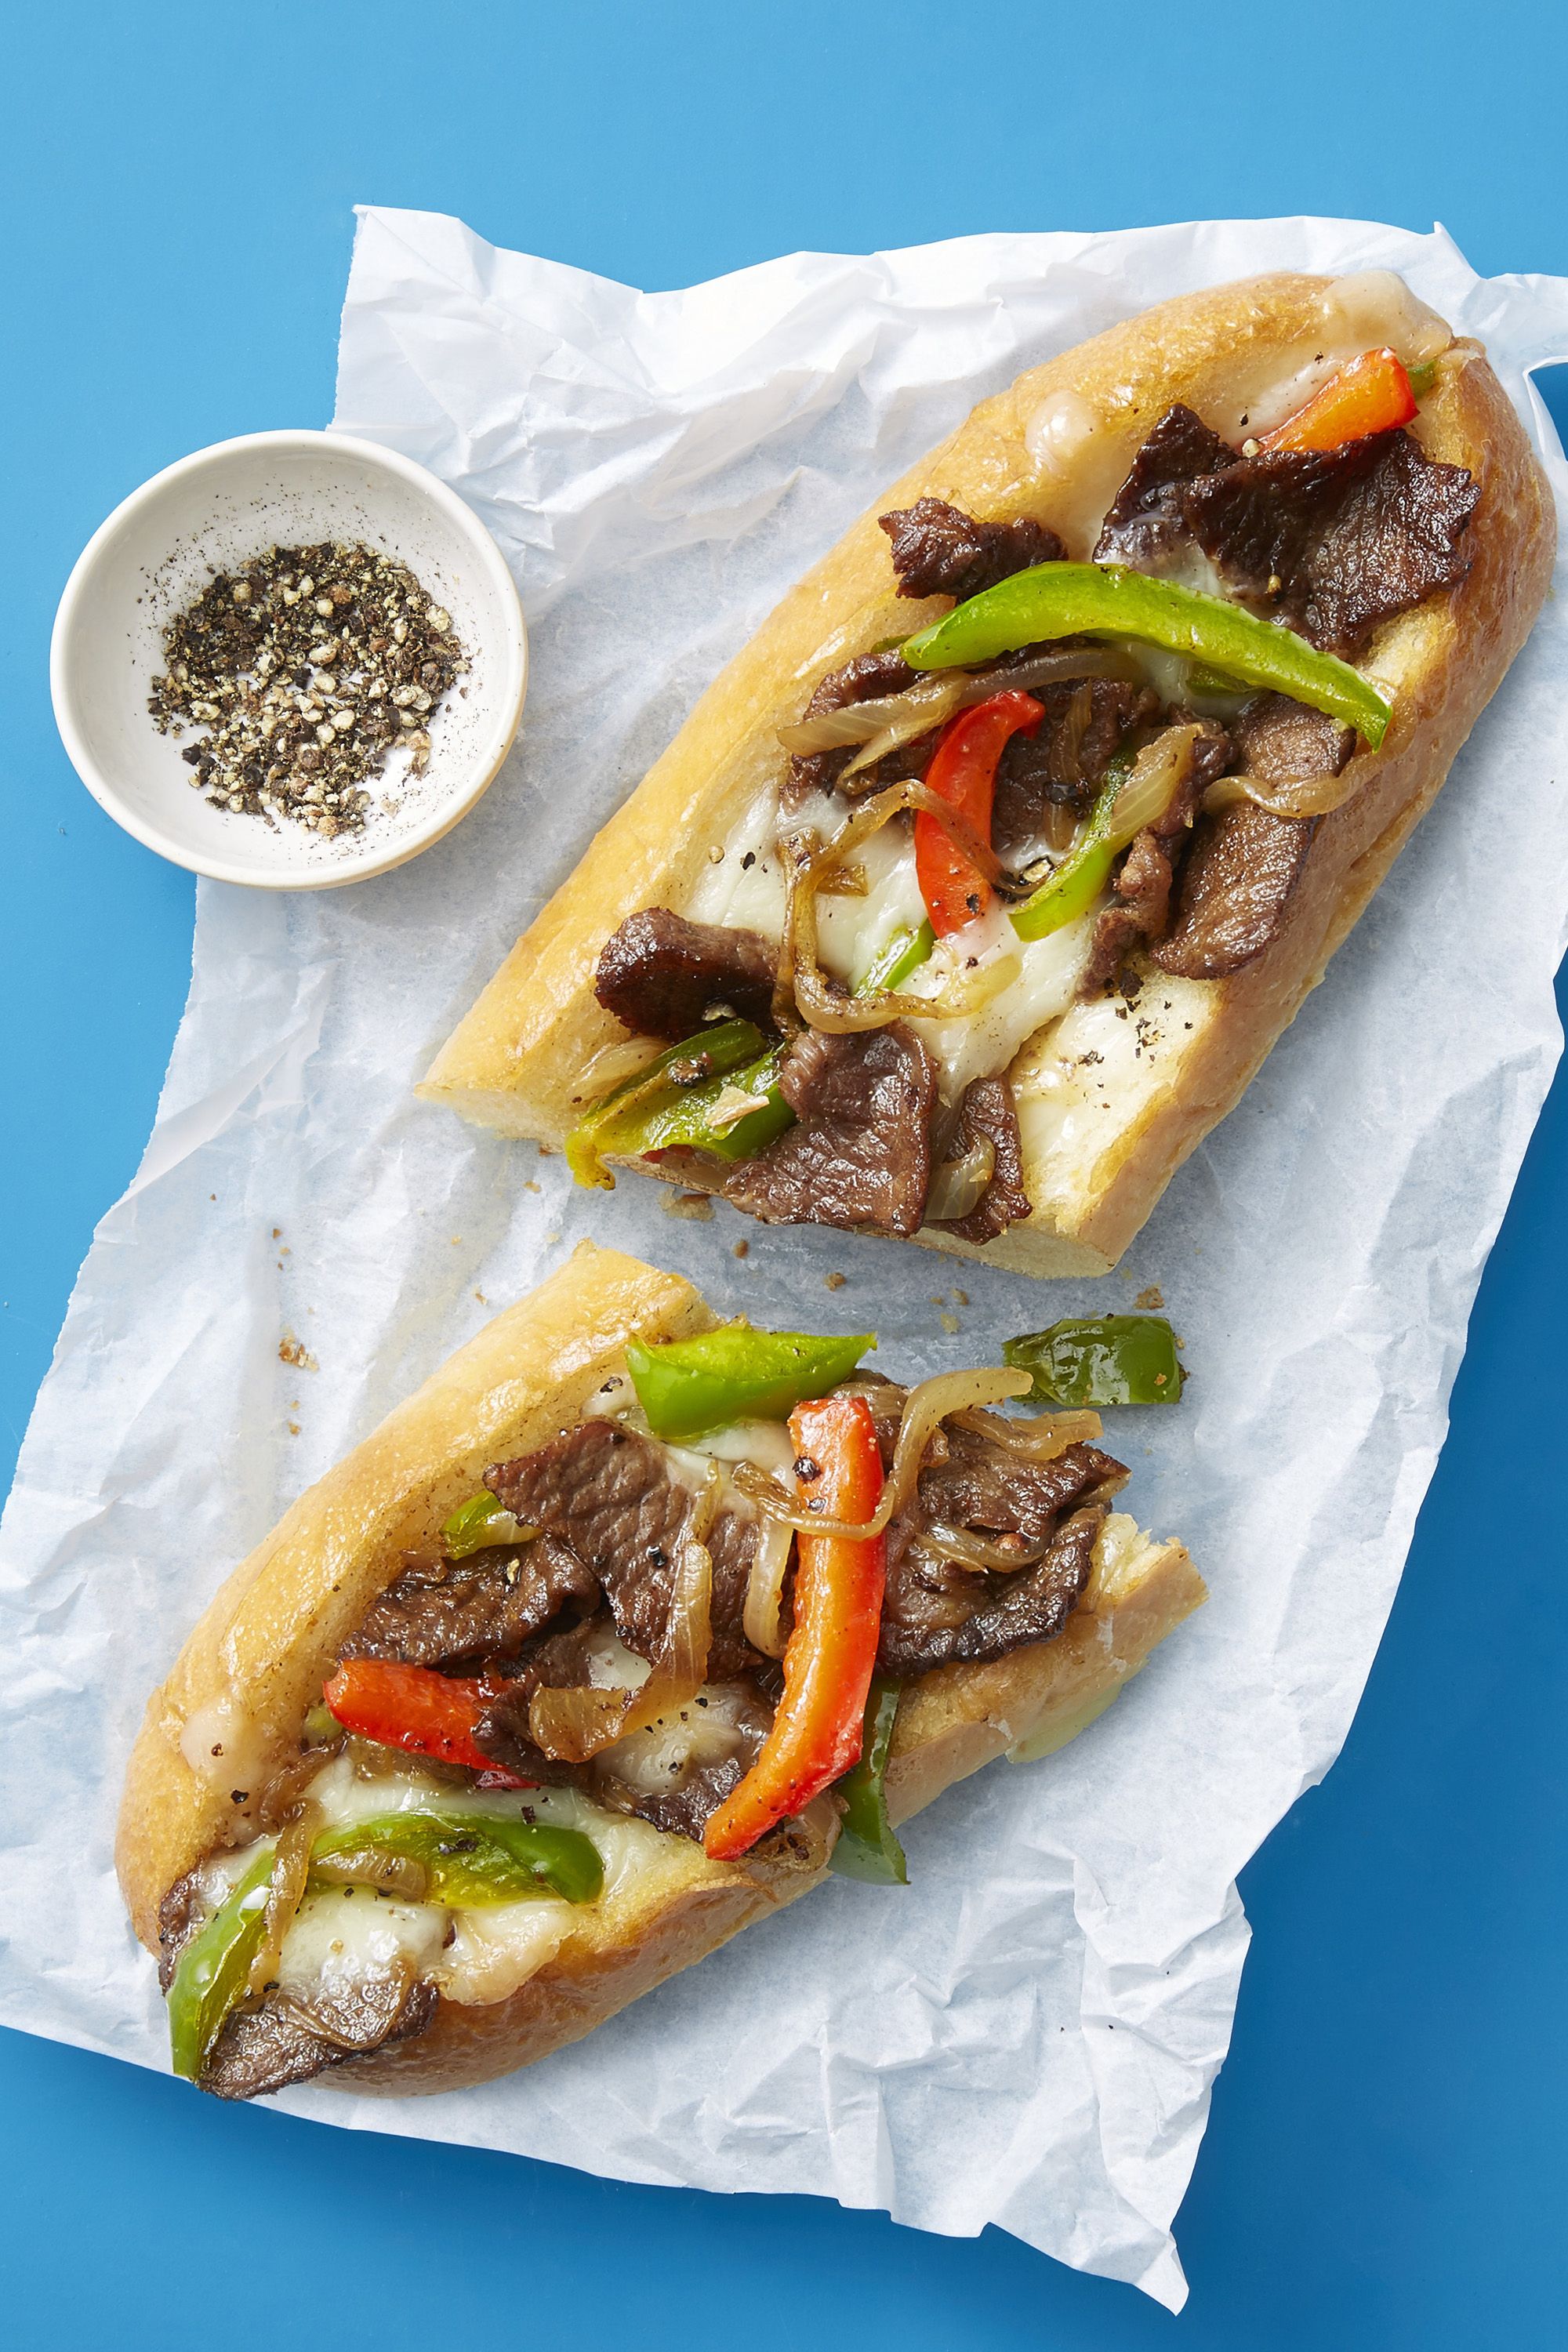 How to Make Philly Cheesesteak - Best Philly Cheesesteak Recipe